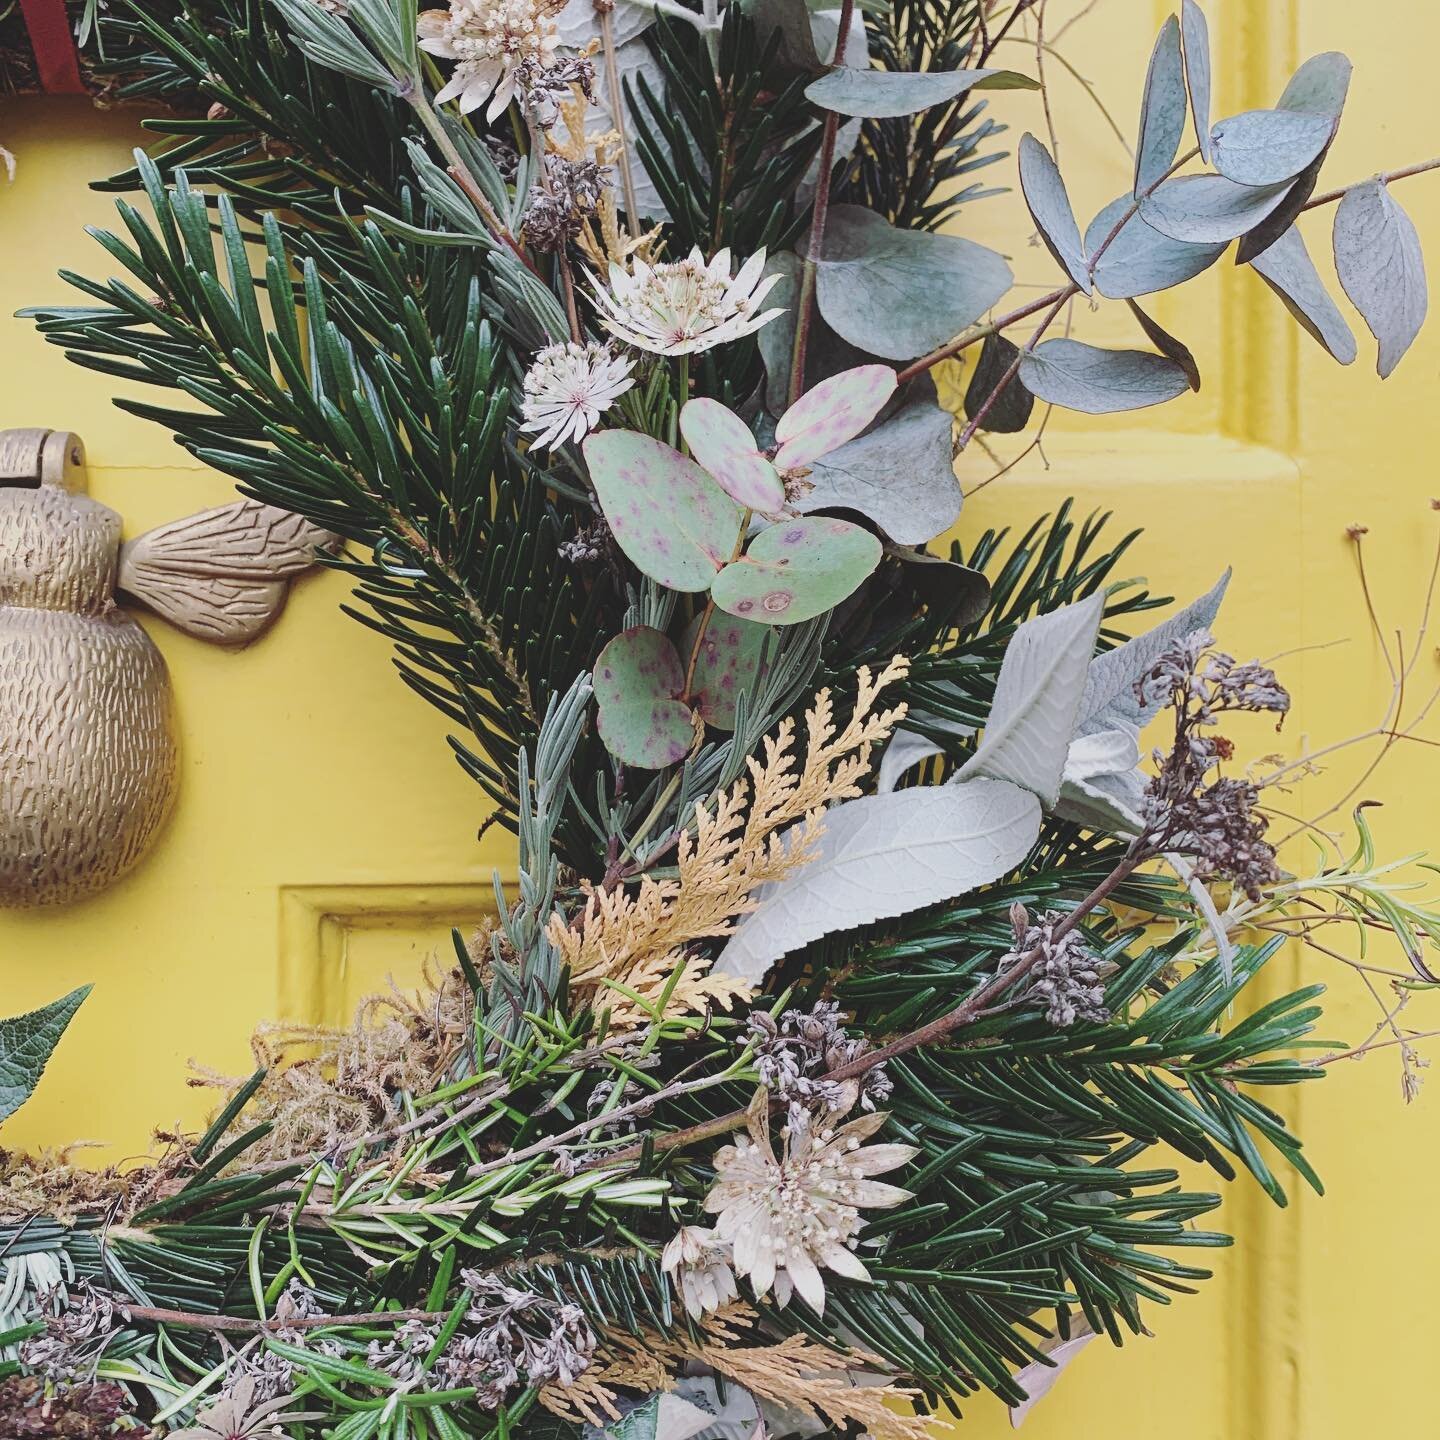 Ingredients for a Christmas wreath
 Last years dried out wreath
 Bits from the garden including 
Lavender, eucalyptus, hattie's pincushion ( Astrantia) &amp; rosemary 
A few stolen branches from the Christmas tree 
A naughty cat 
A cup of tea &amp; a